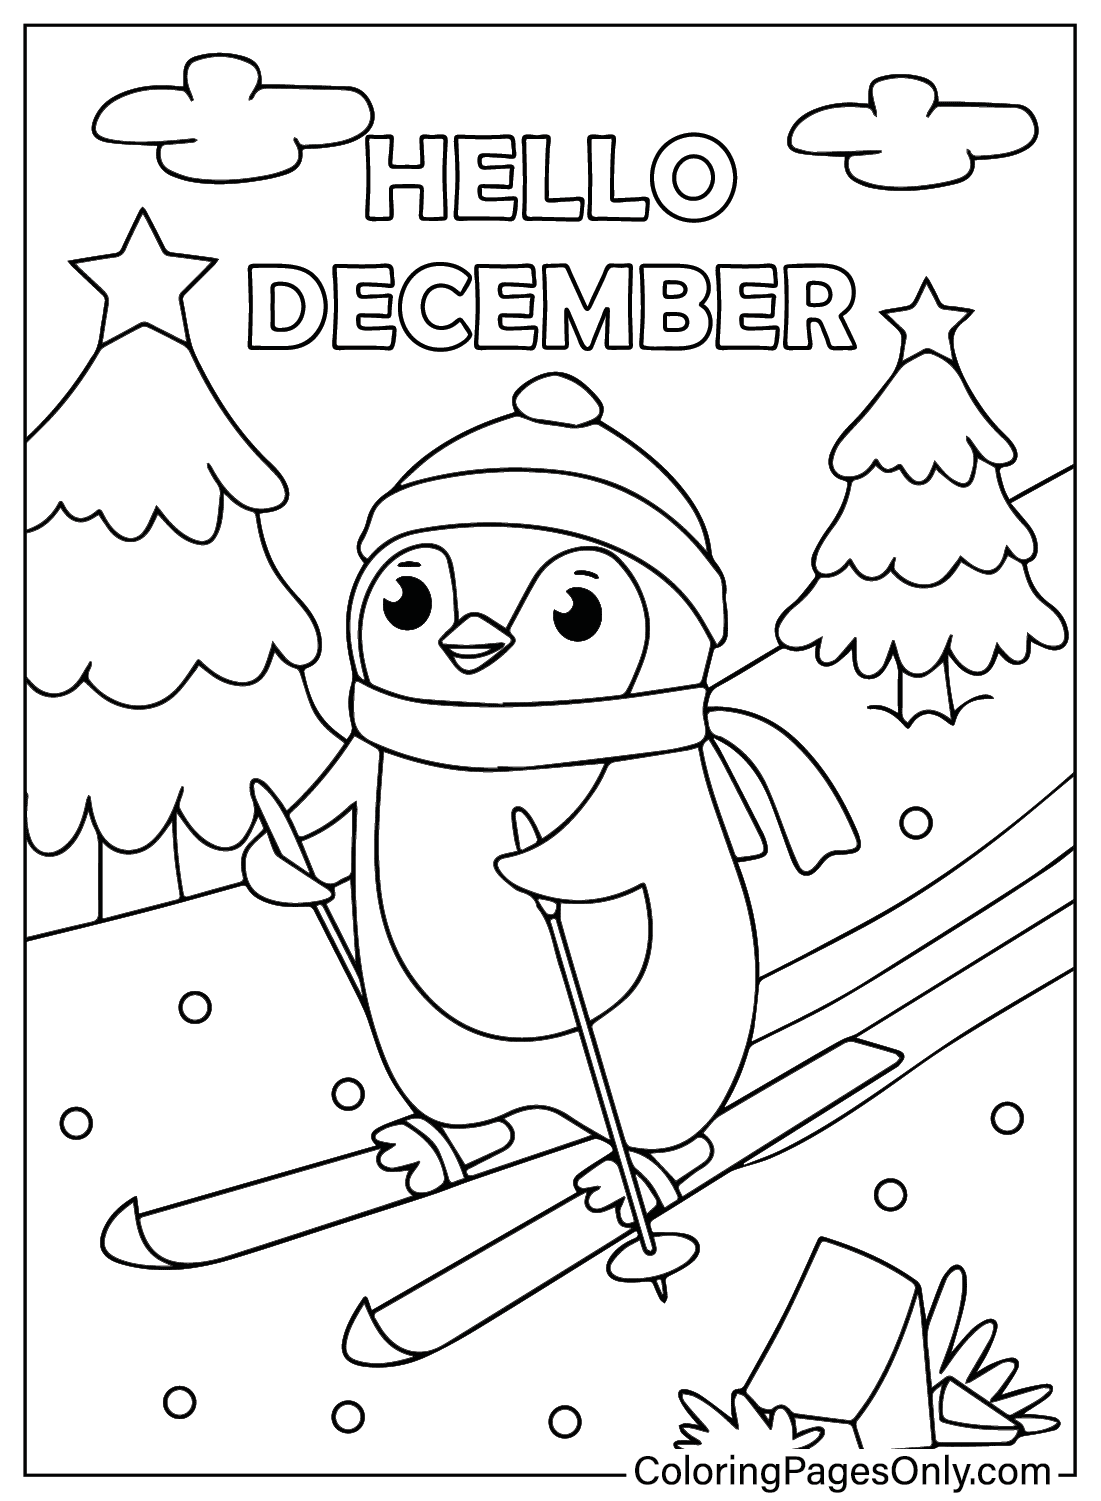 December Penguin Coloring Page from Penguin